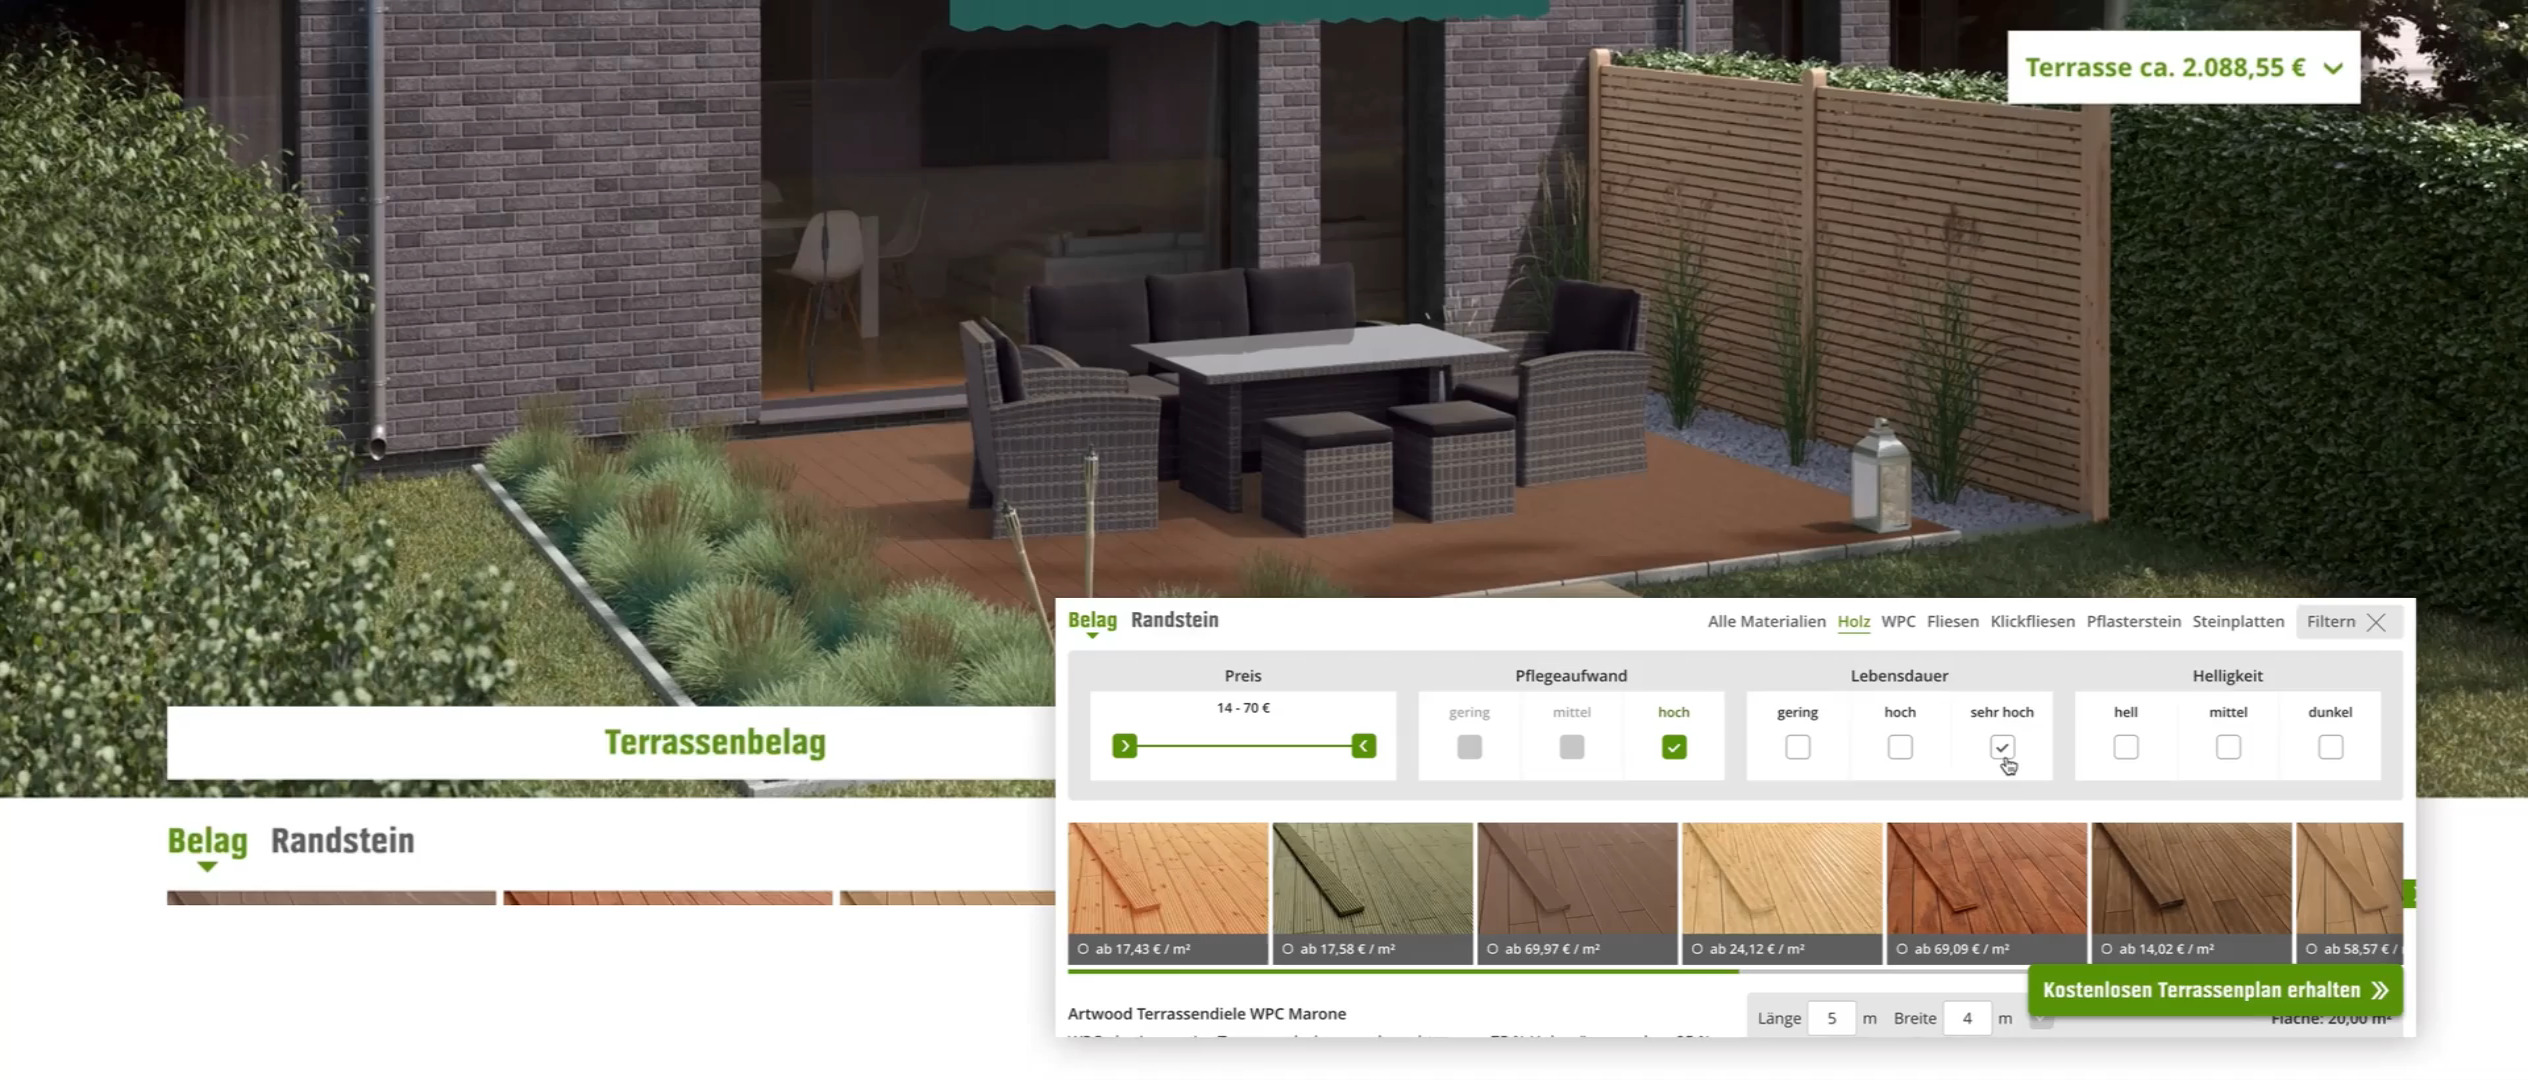 Animation of the configuration process for a terrace